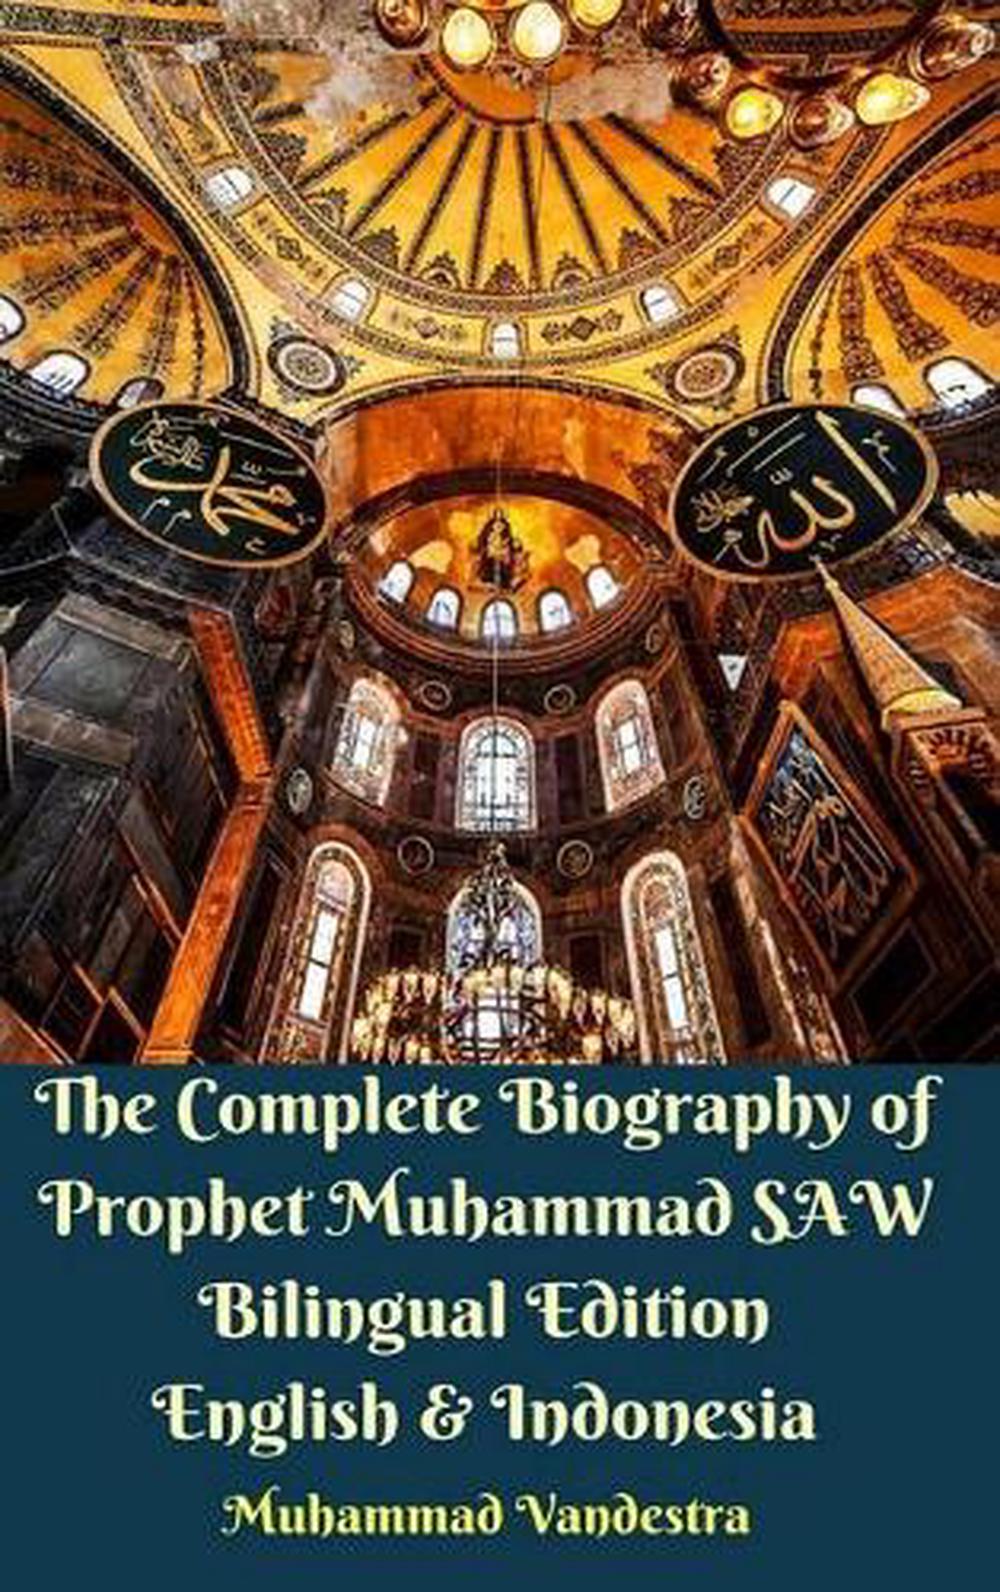 biography of prophet muhammad saw in english